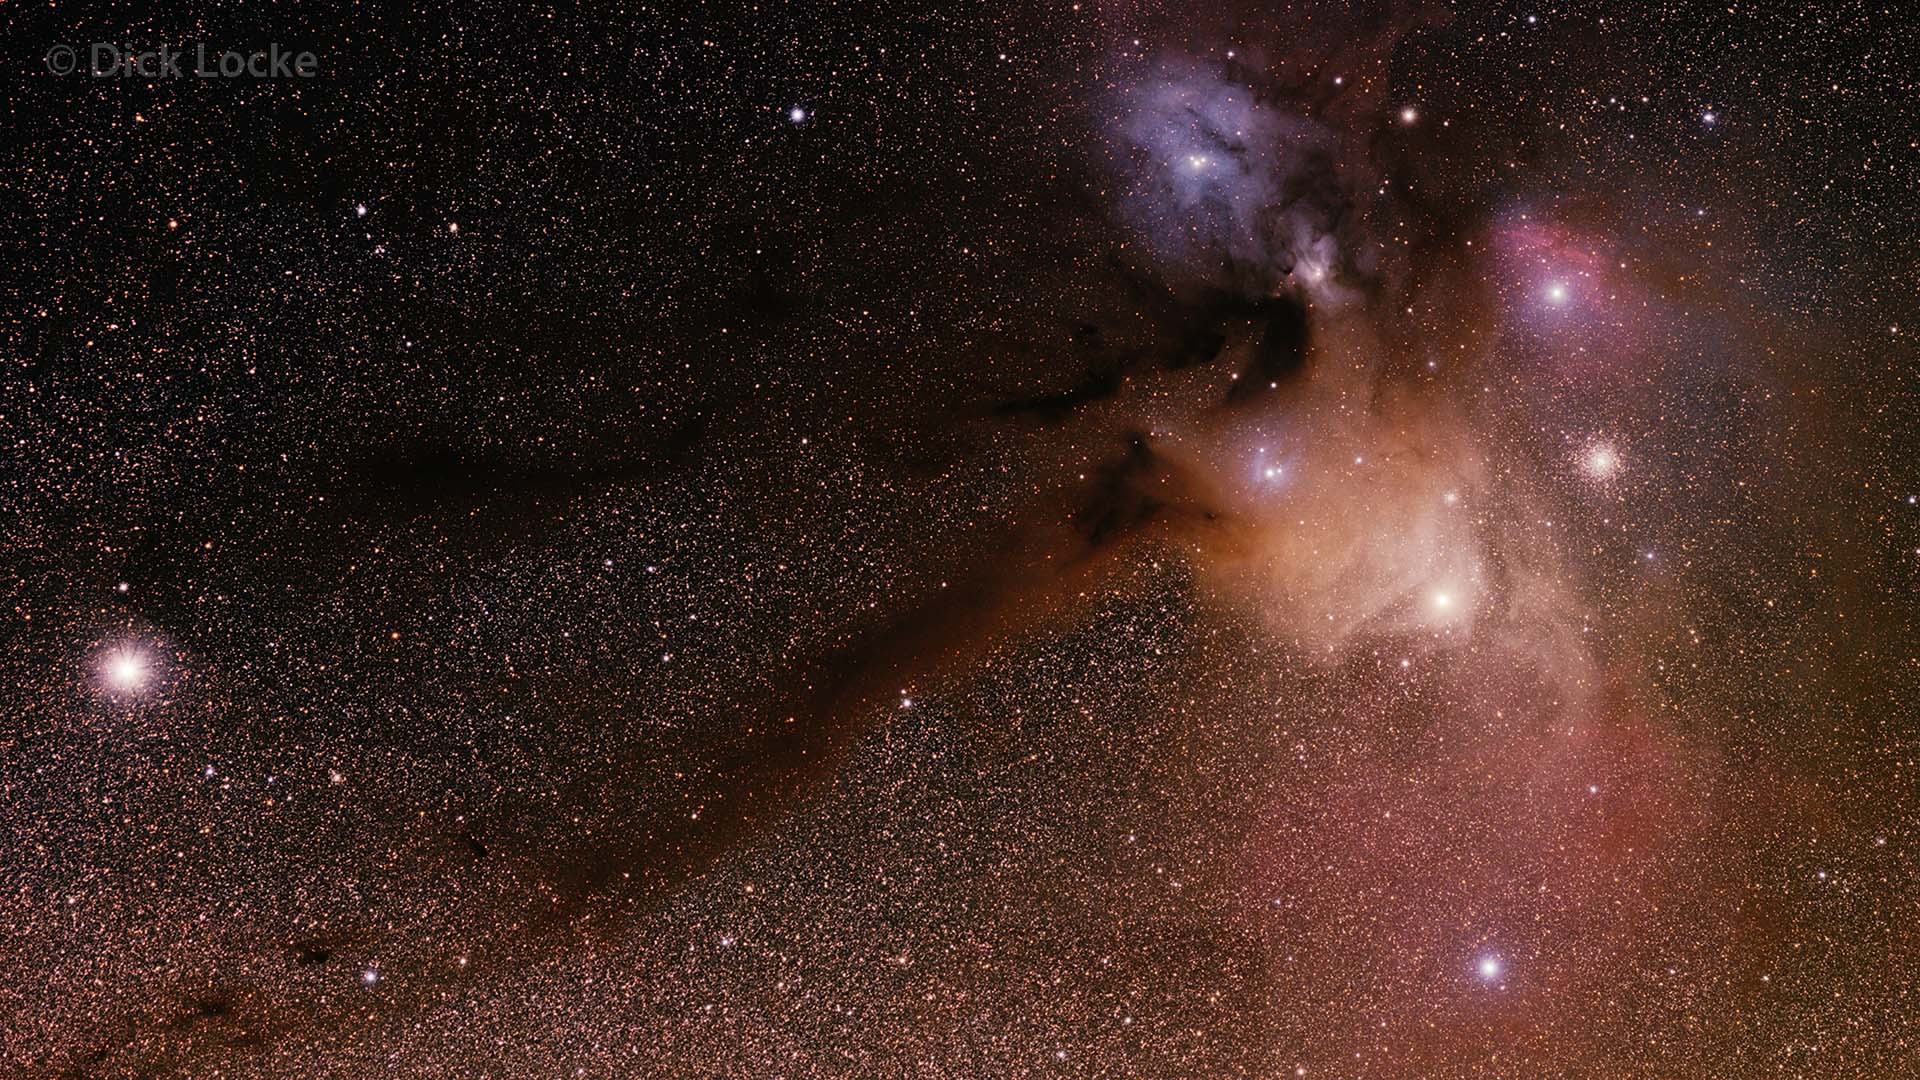 Antares Image (Picture of the Antares area in Scorpius)